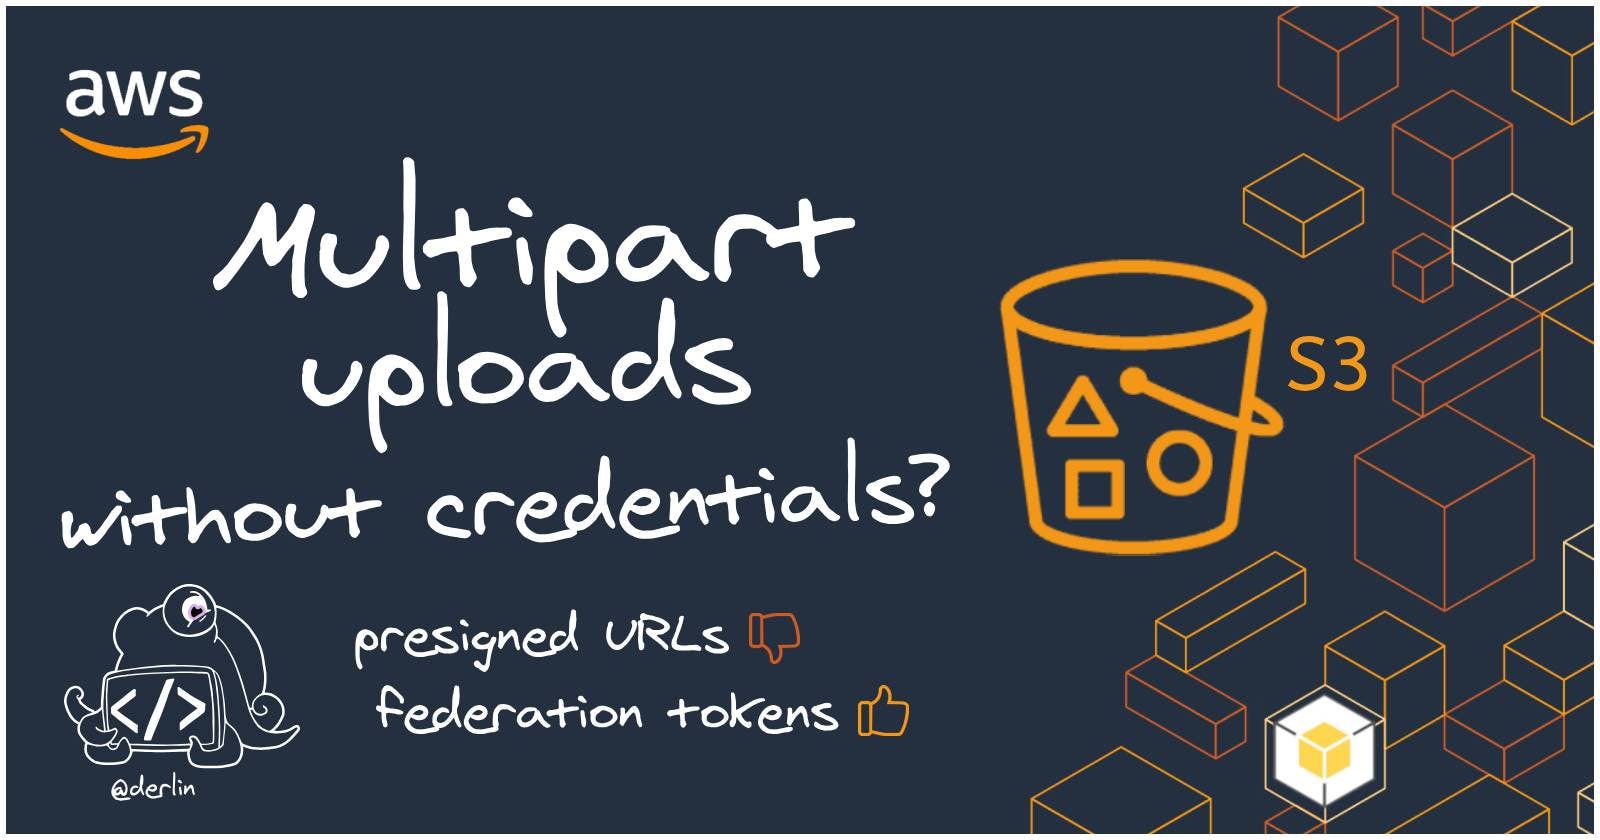 AWS S3 multipart uploads from unauthenticated users? presigned URLs (😕) vs federation tokens (😃)